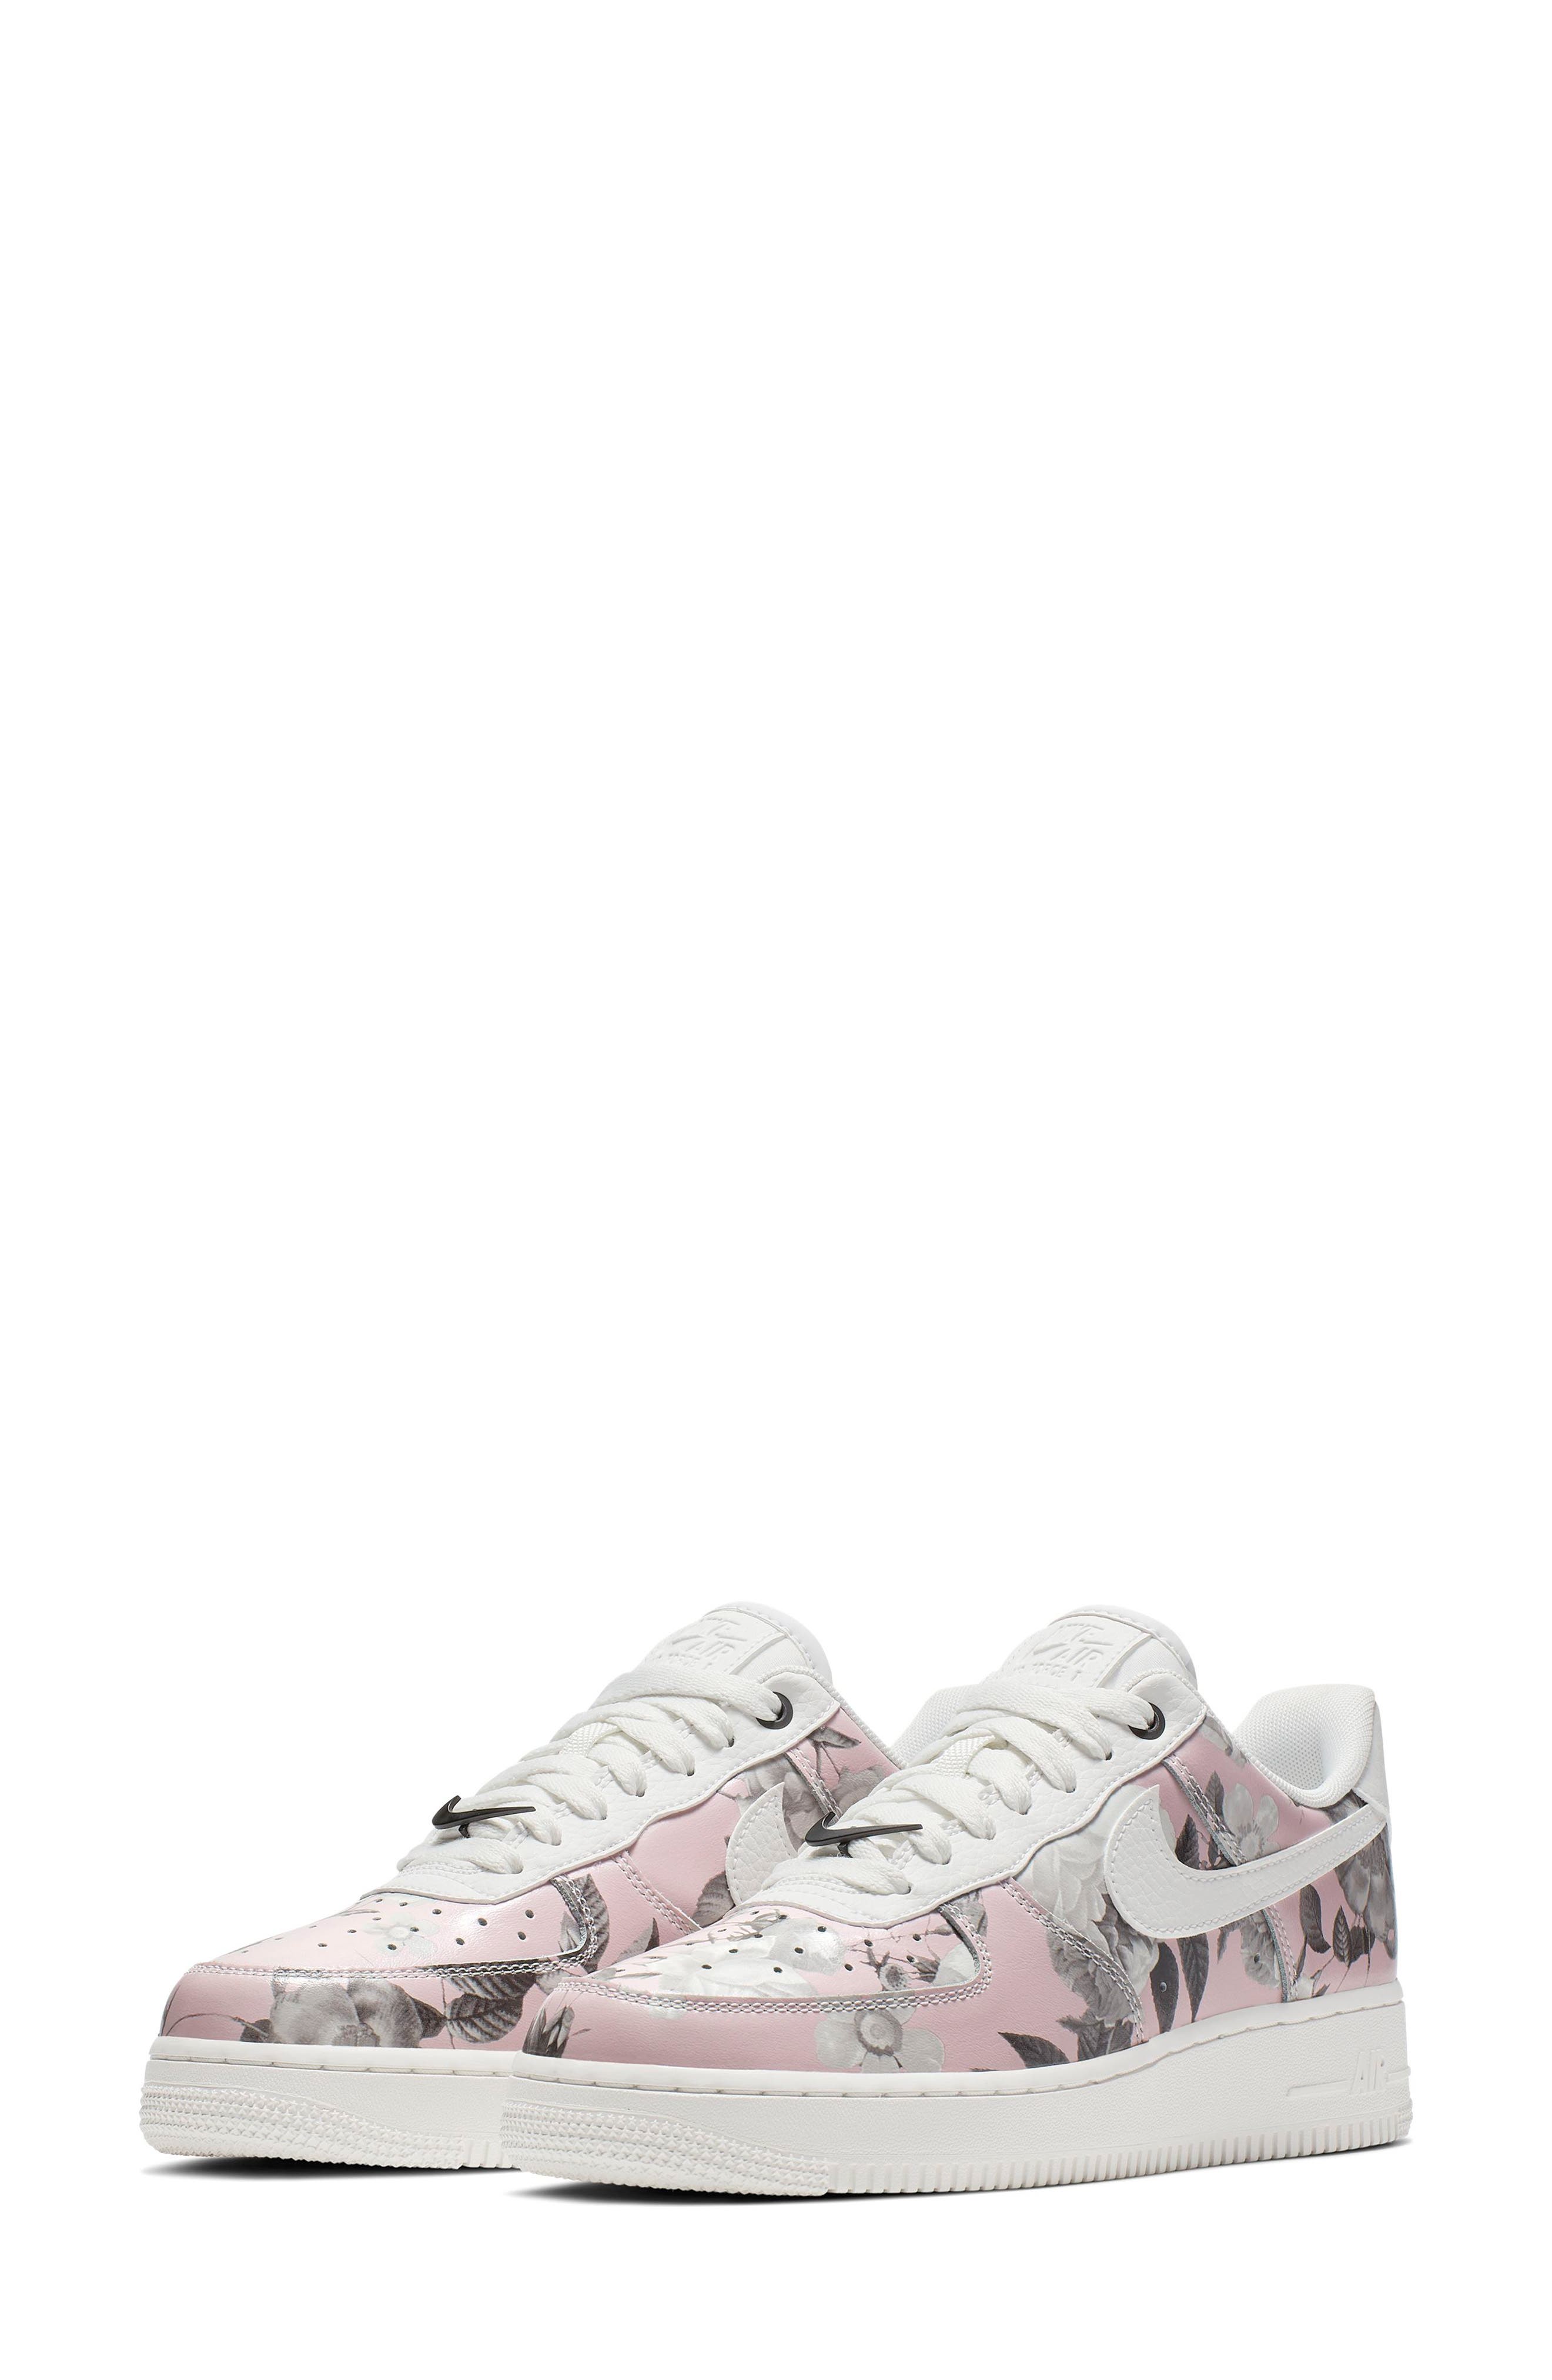 nike air force 1 07 womens nordstrom